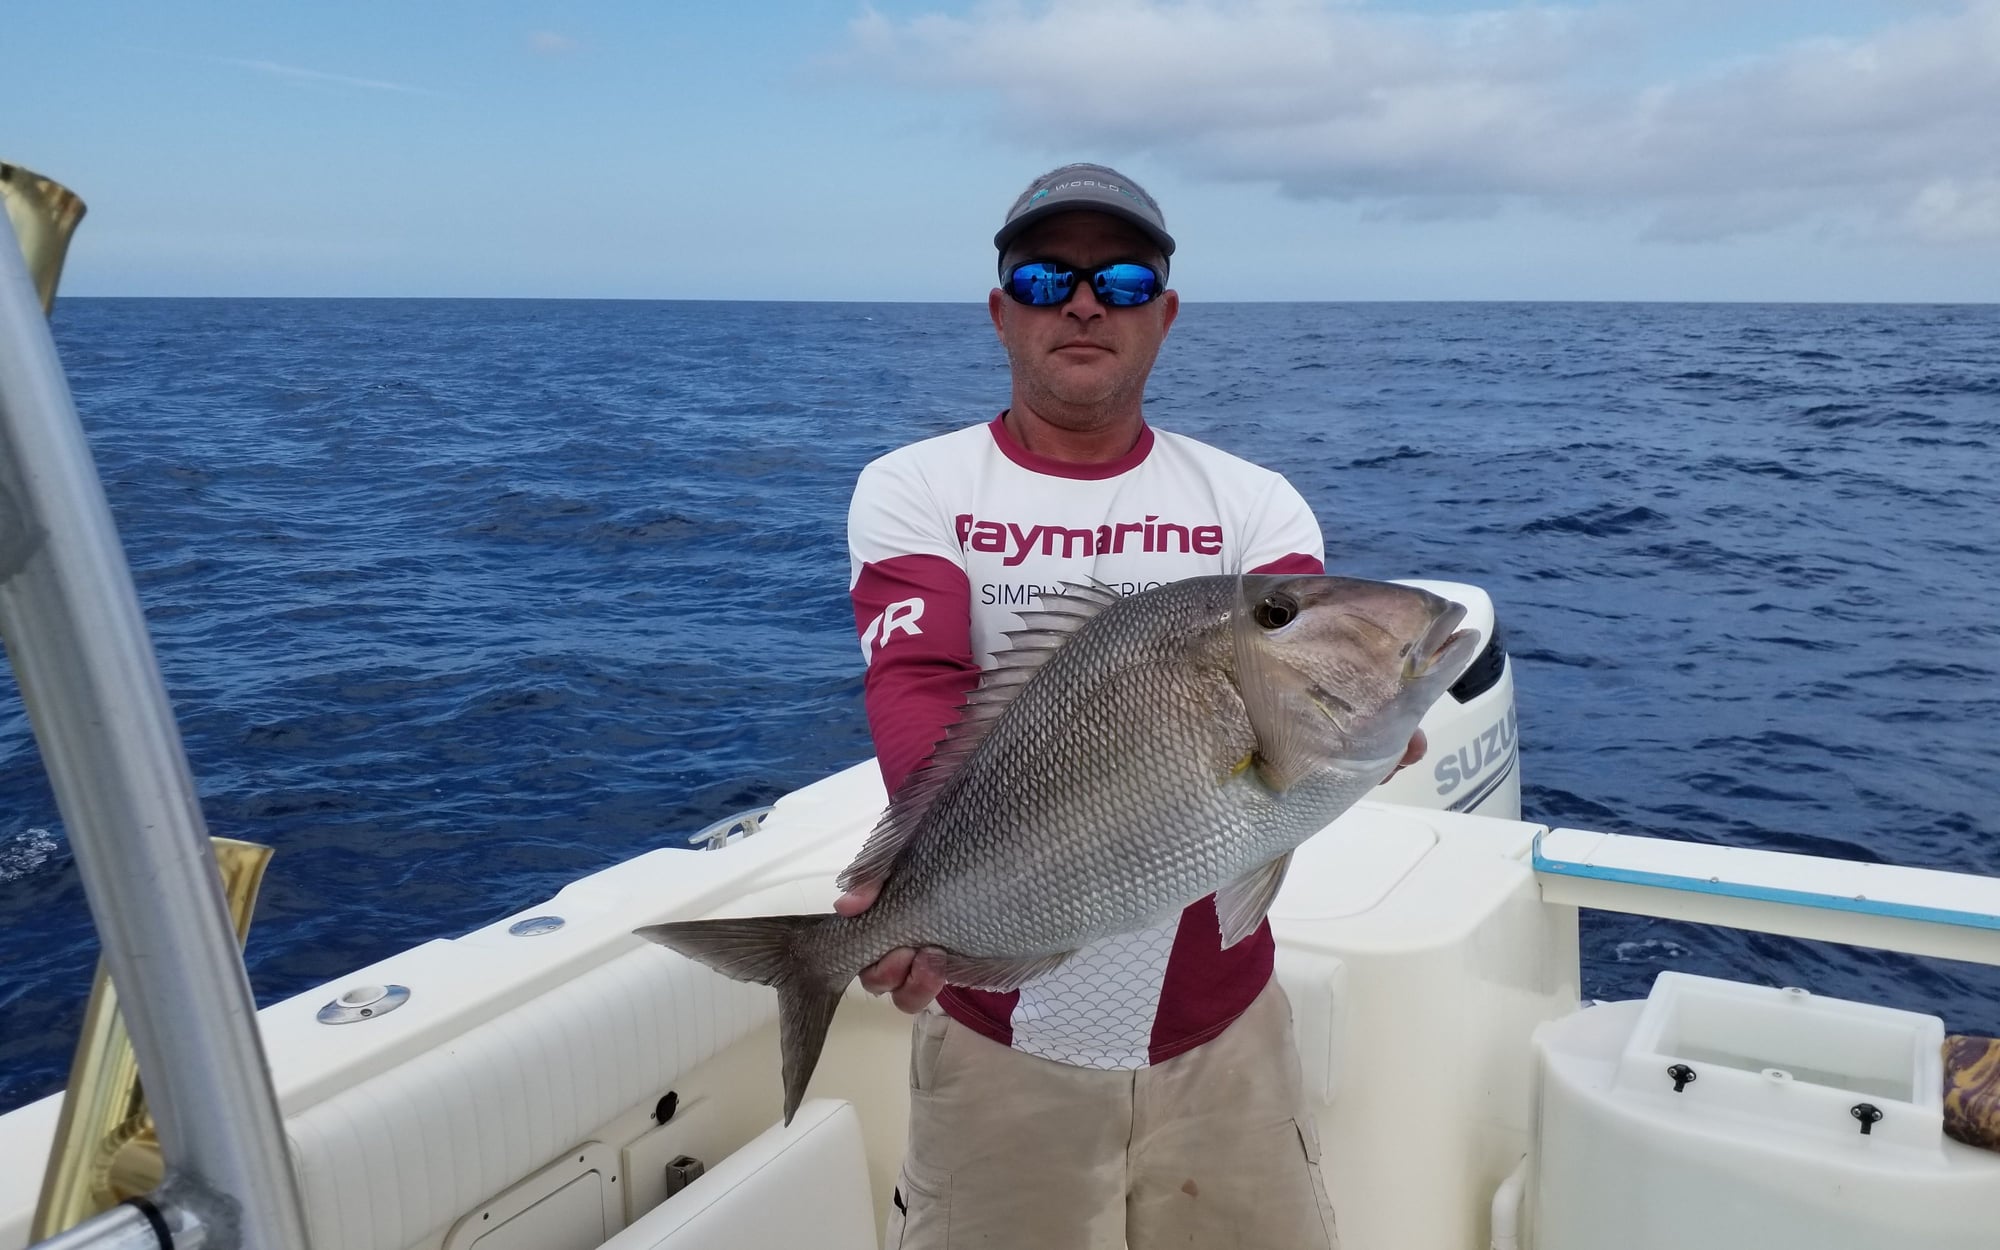 Snapper setup - Leader question - The Hull Truth - Boating and Fishing Forum